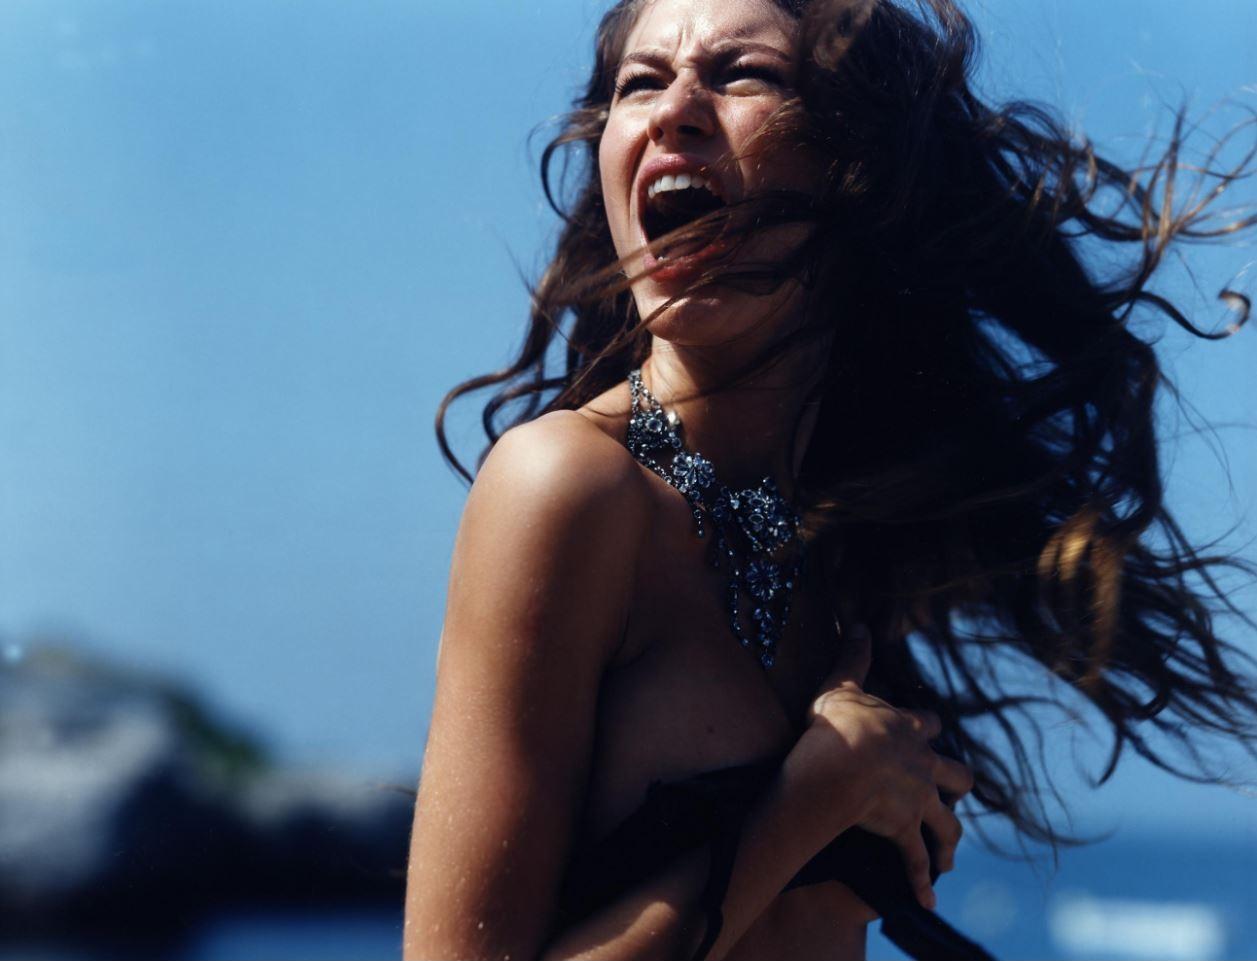 Michel Comte Color Photograph - Gisele Buendchen Screaming, Cannes - the naked supermodel standing against sky